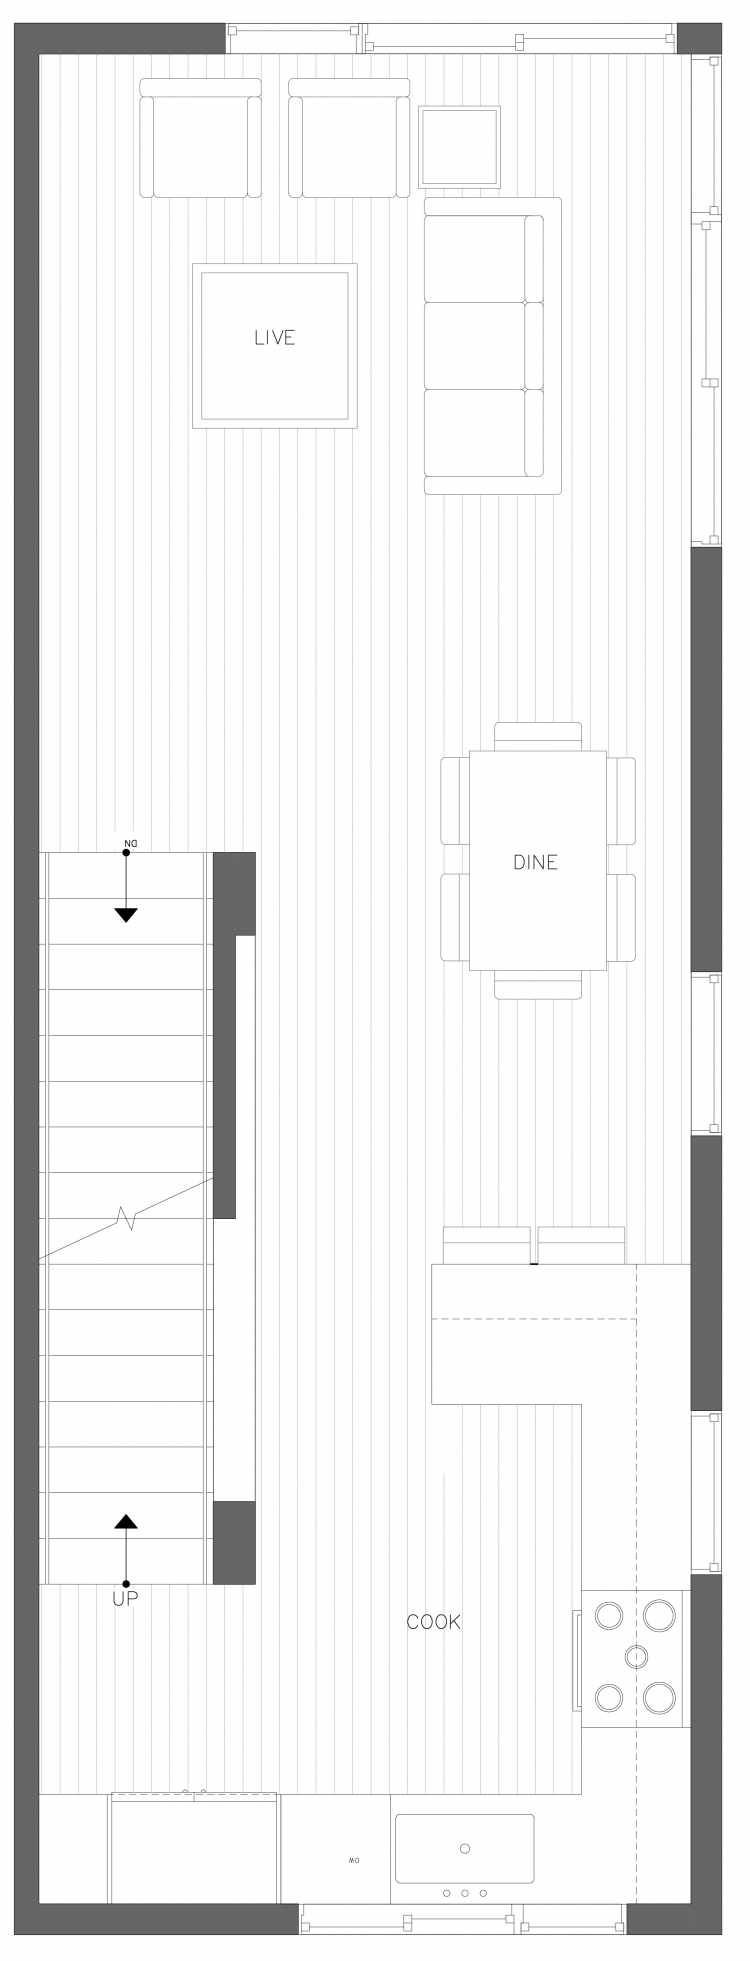 Second Floor Plan of 3418C 15th Ave W, One of the Arlo Townhomes in North Queen Anne